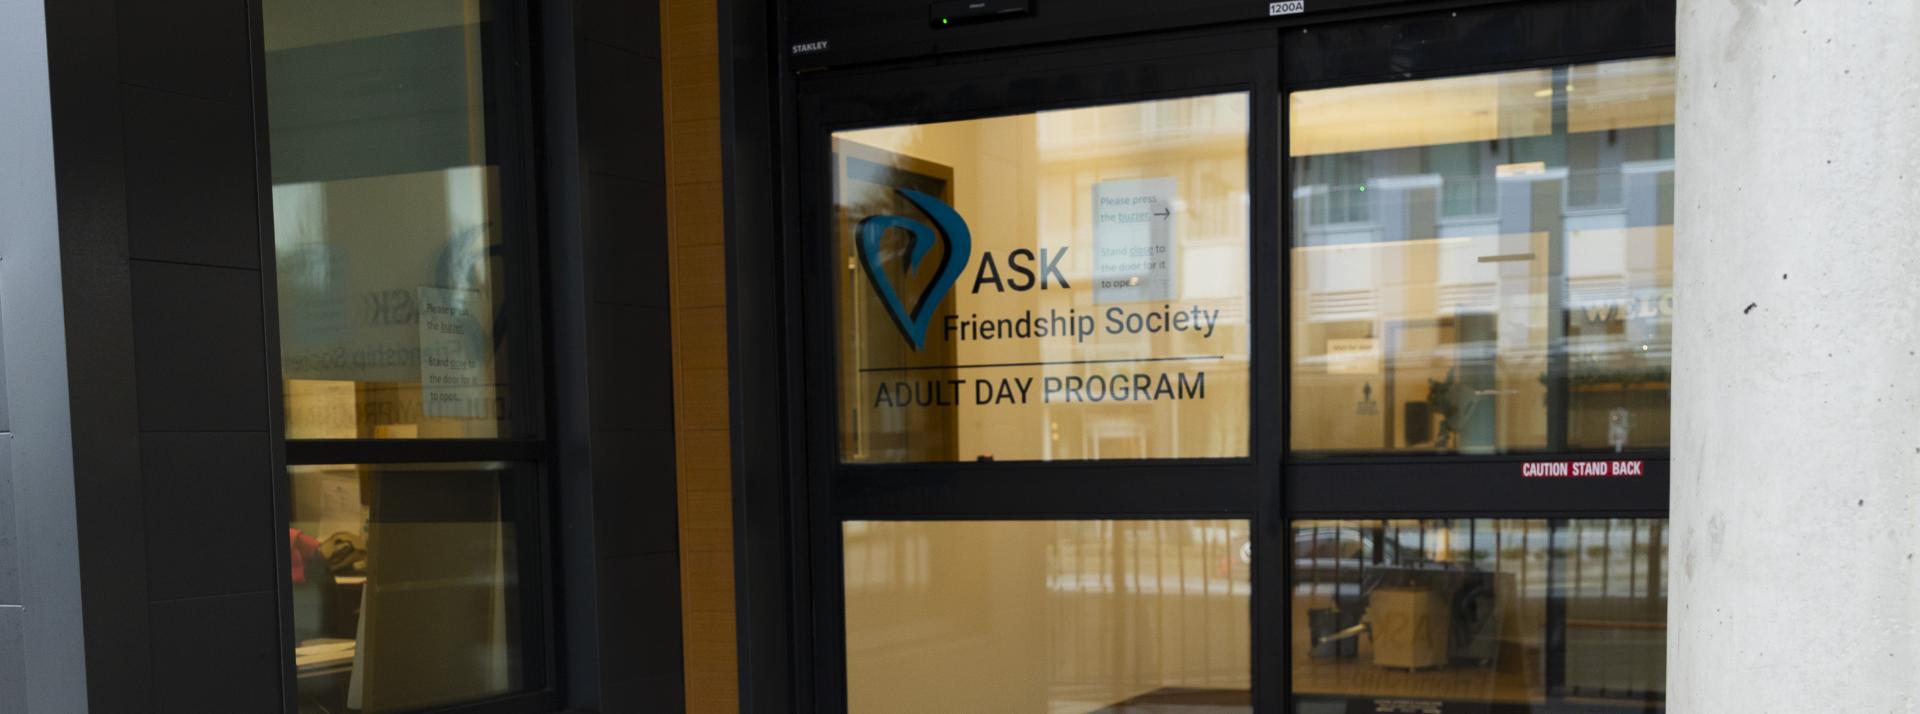 Entrance to the ASK Friendship Society